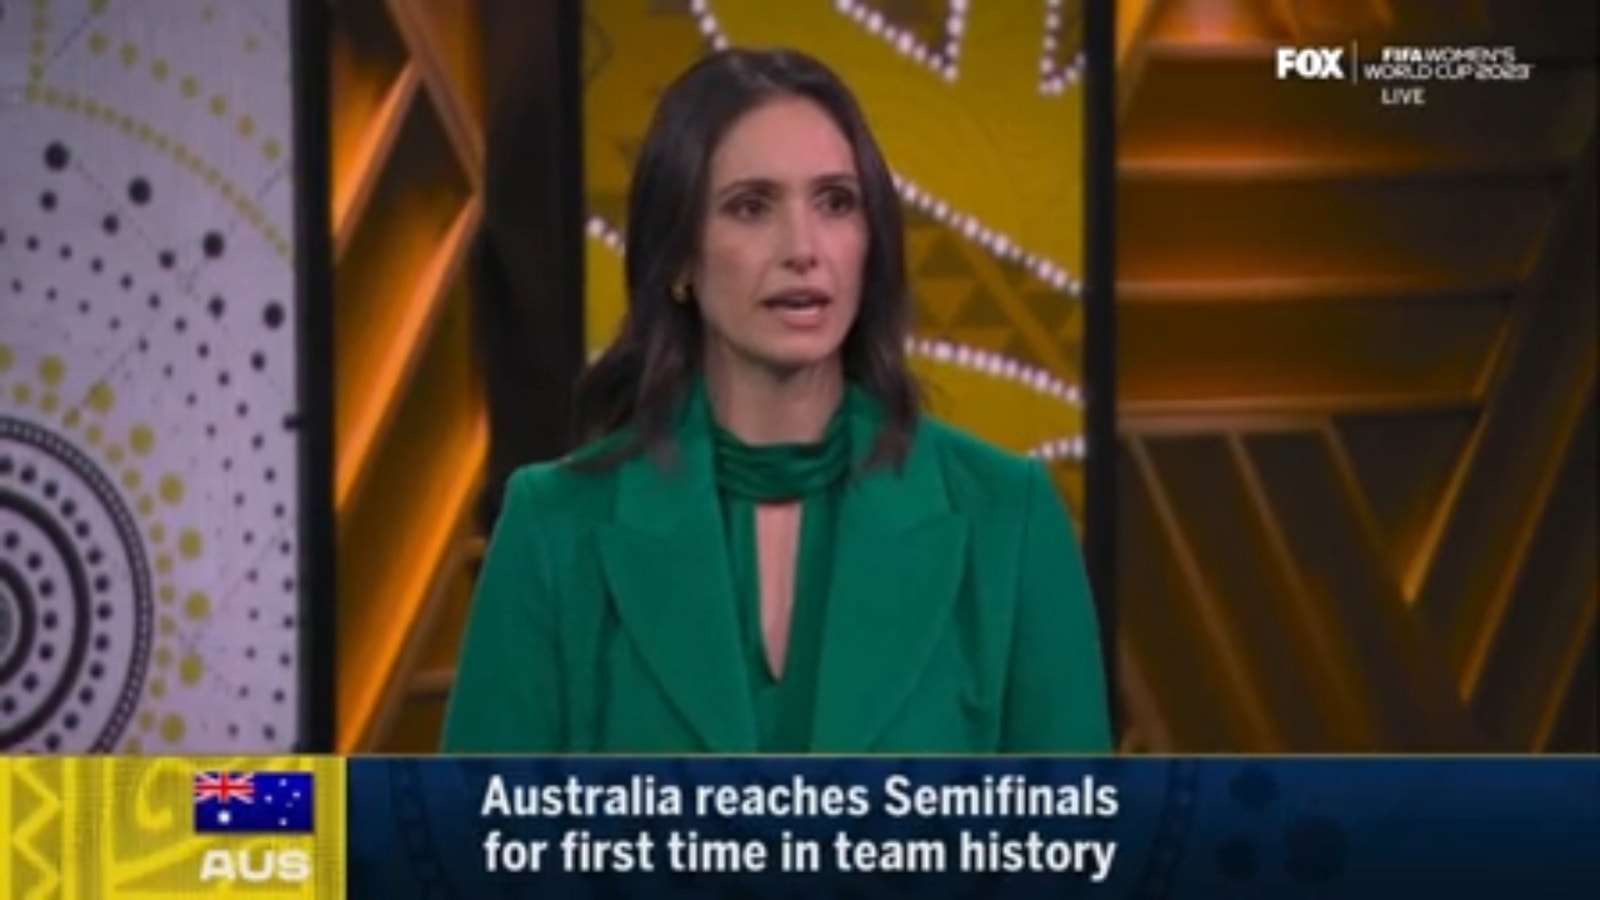 Kate Gill on Australia advancing: "I'm so proud of what they're doing for women's football"